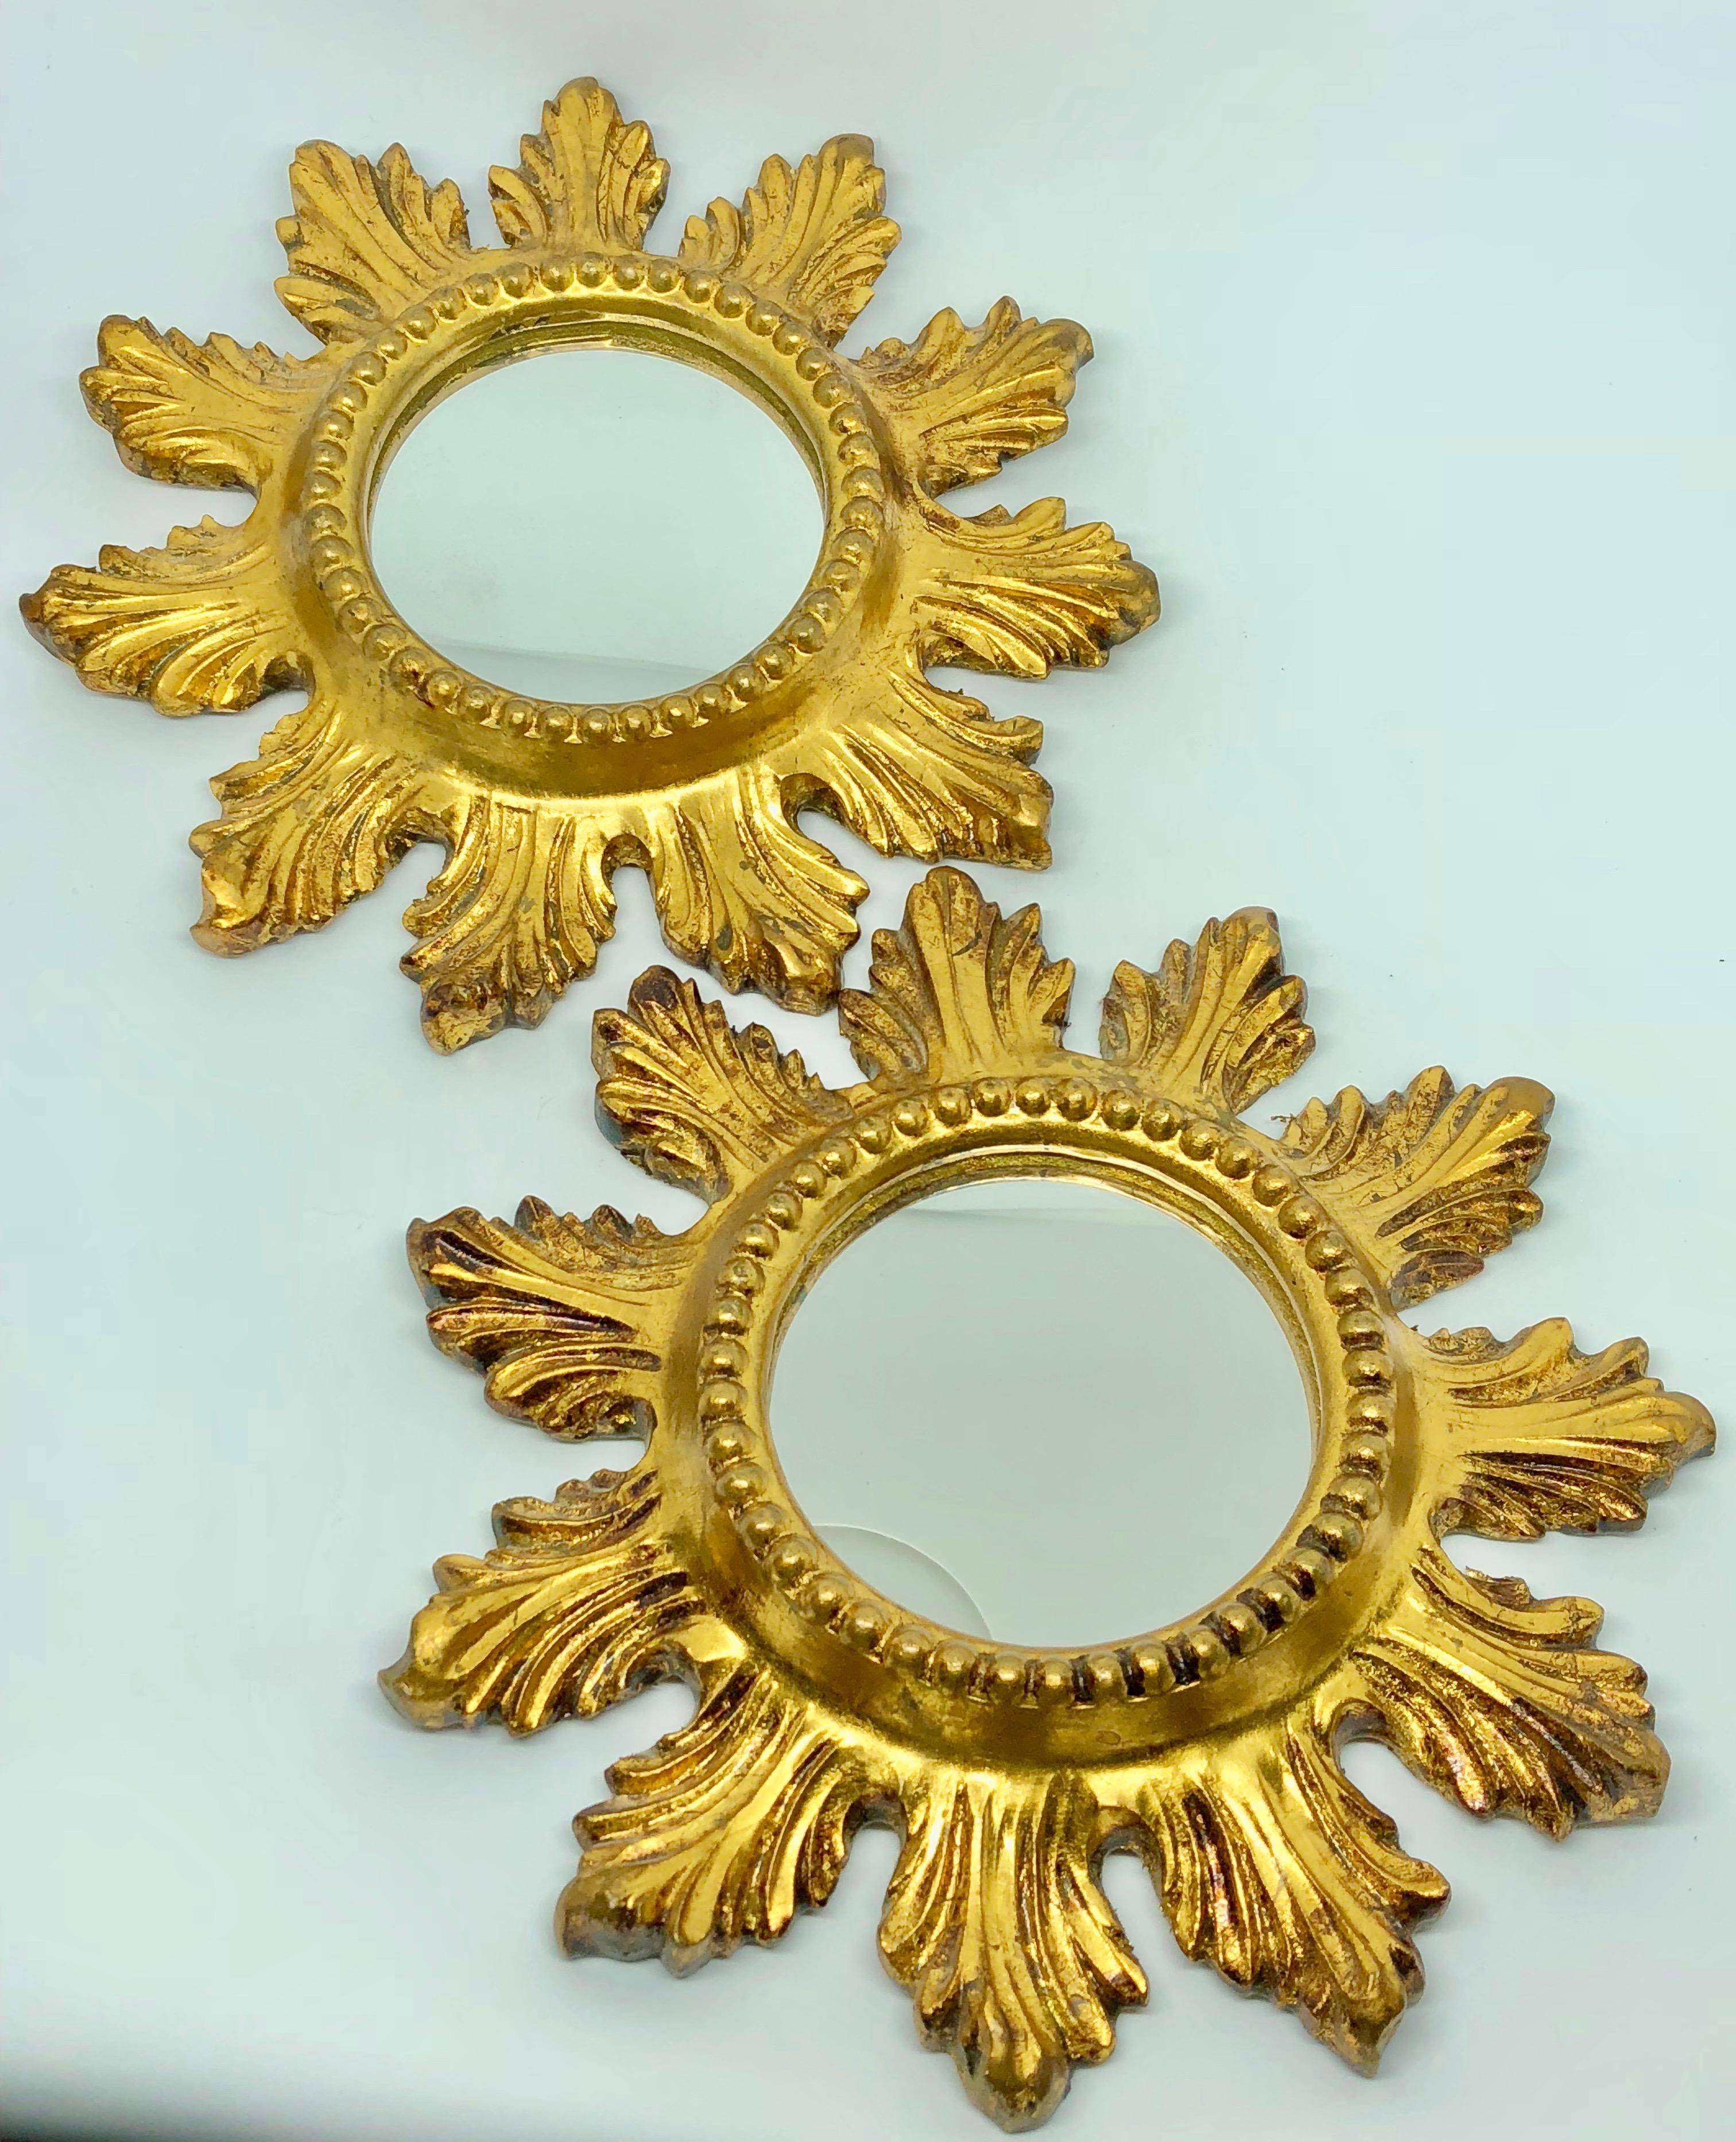 Pair of gorgeous starburst mirrors. Made of gilded wood and composition. No chips, no cracks, no repairs. Each measures approximate 9 1/8